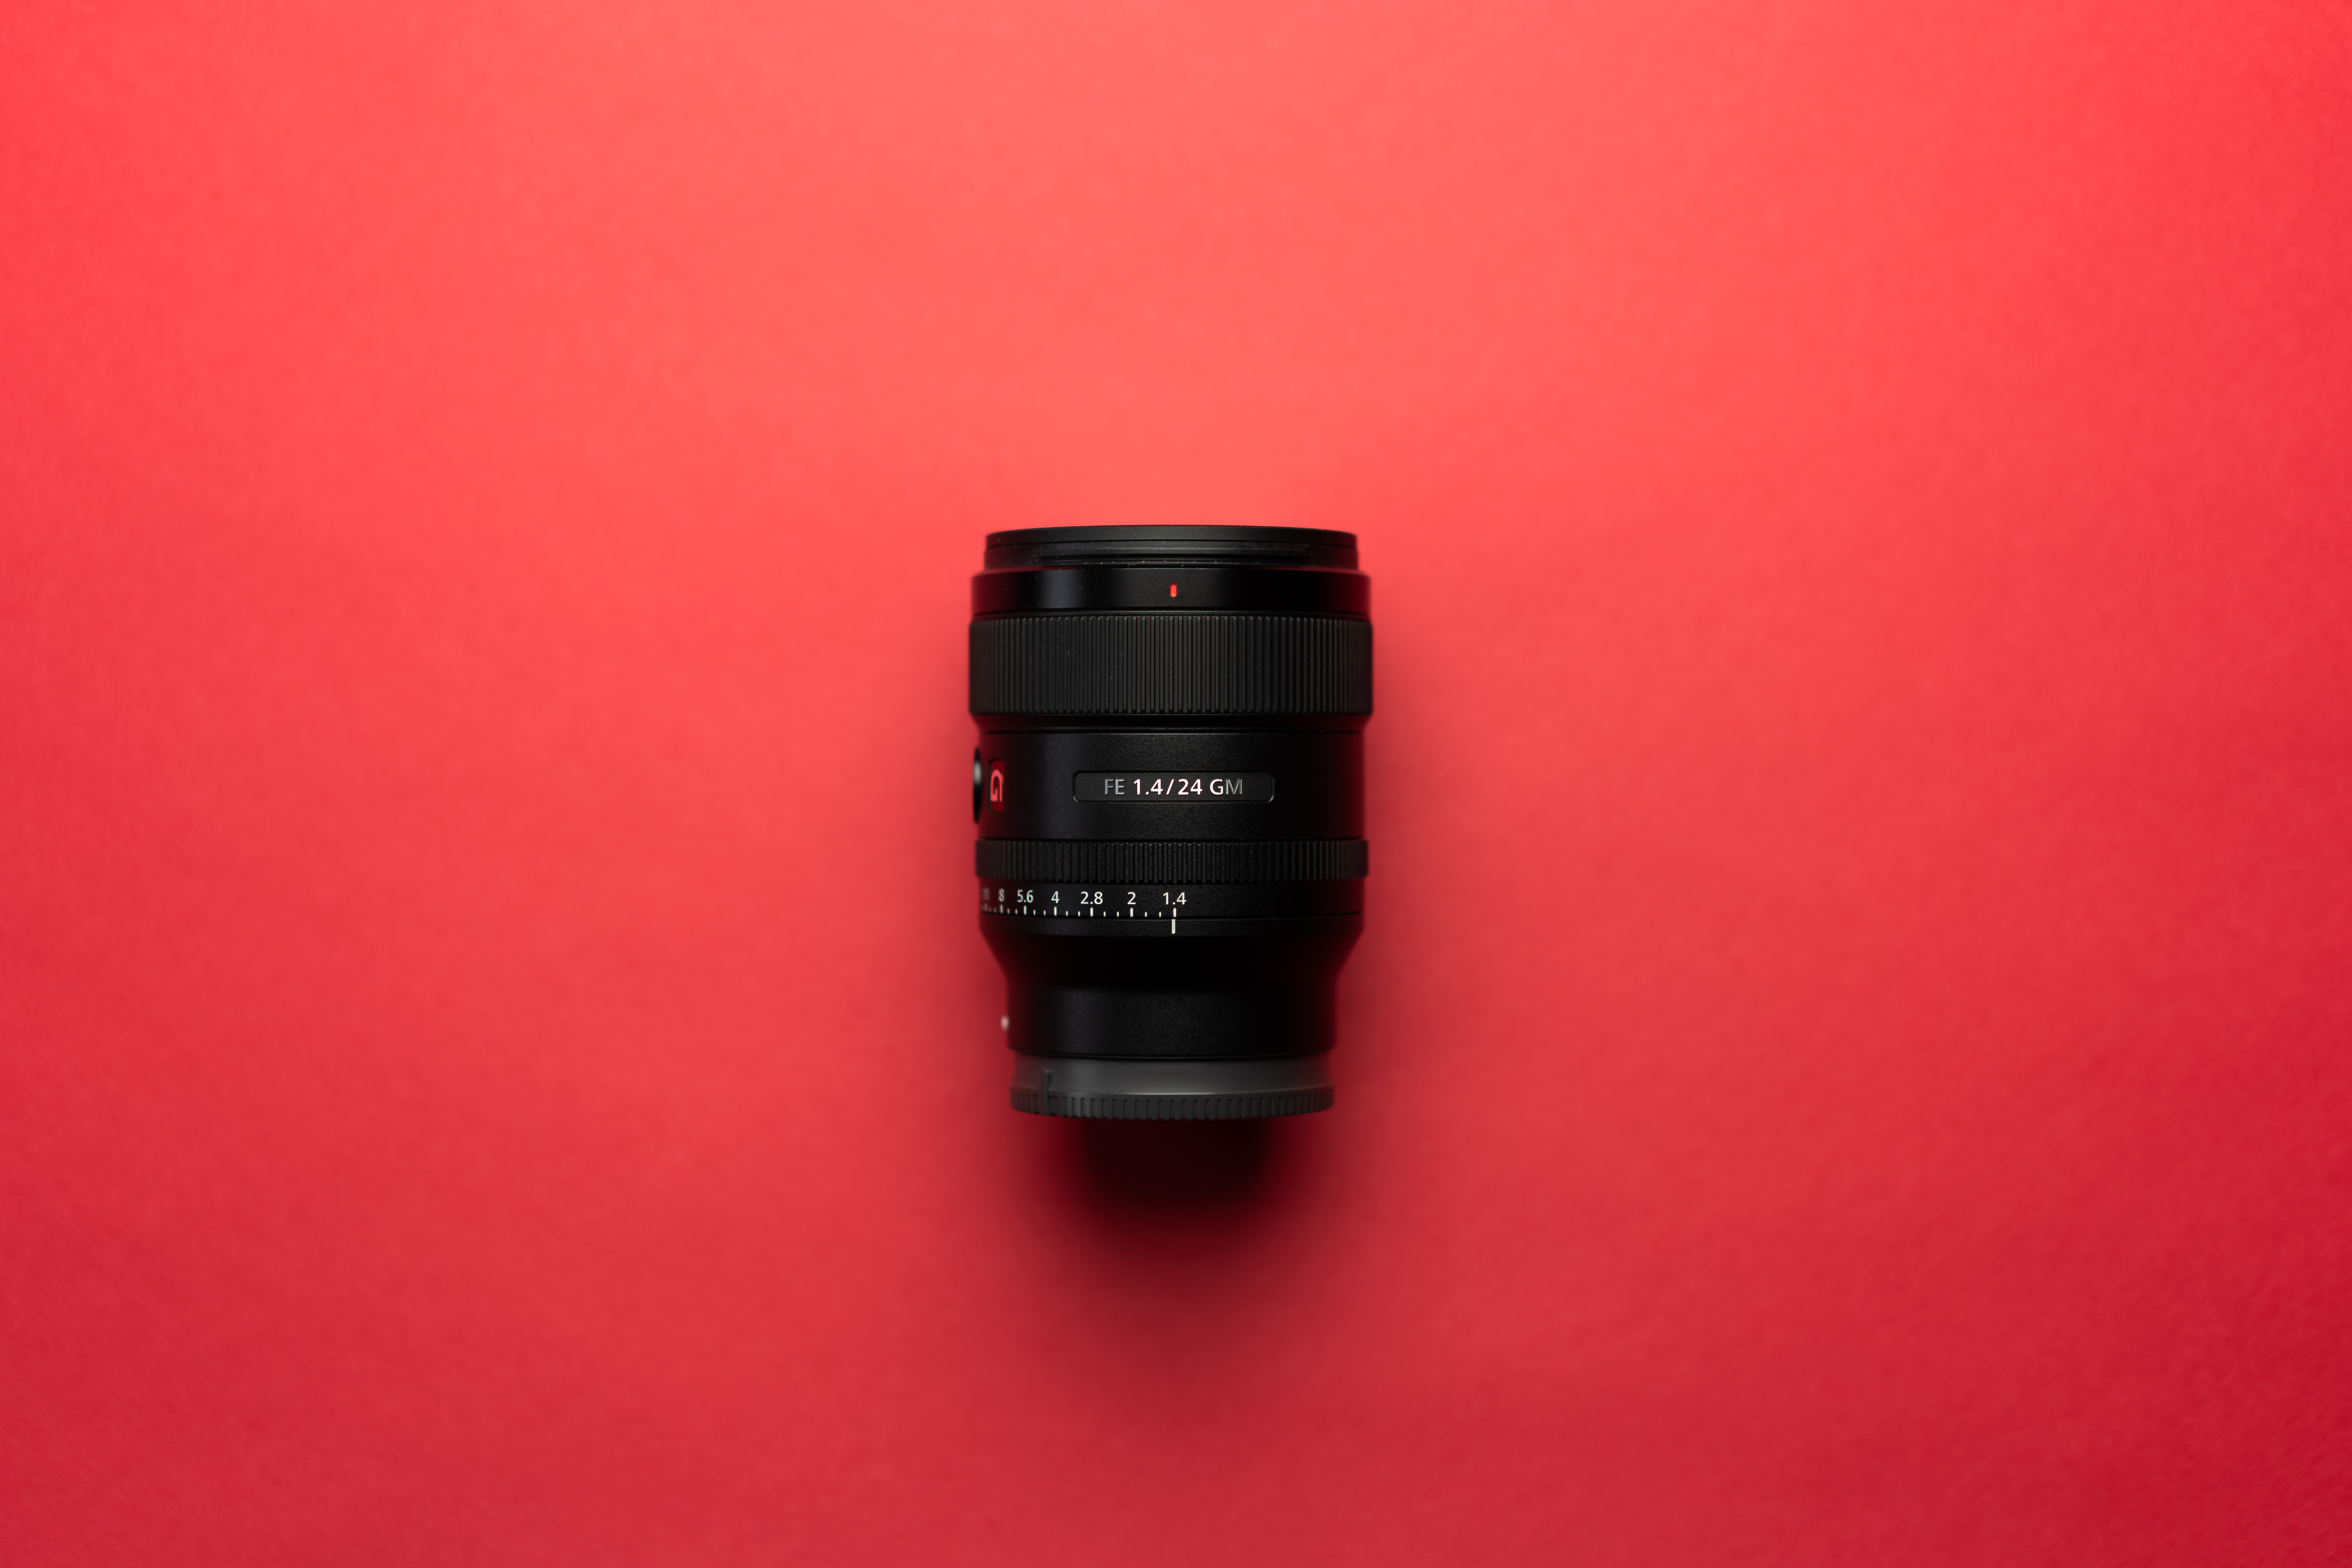 Camera Lens on a Red Background Free Stock Photo | picjumbo